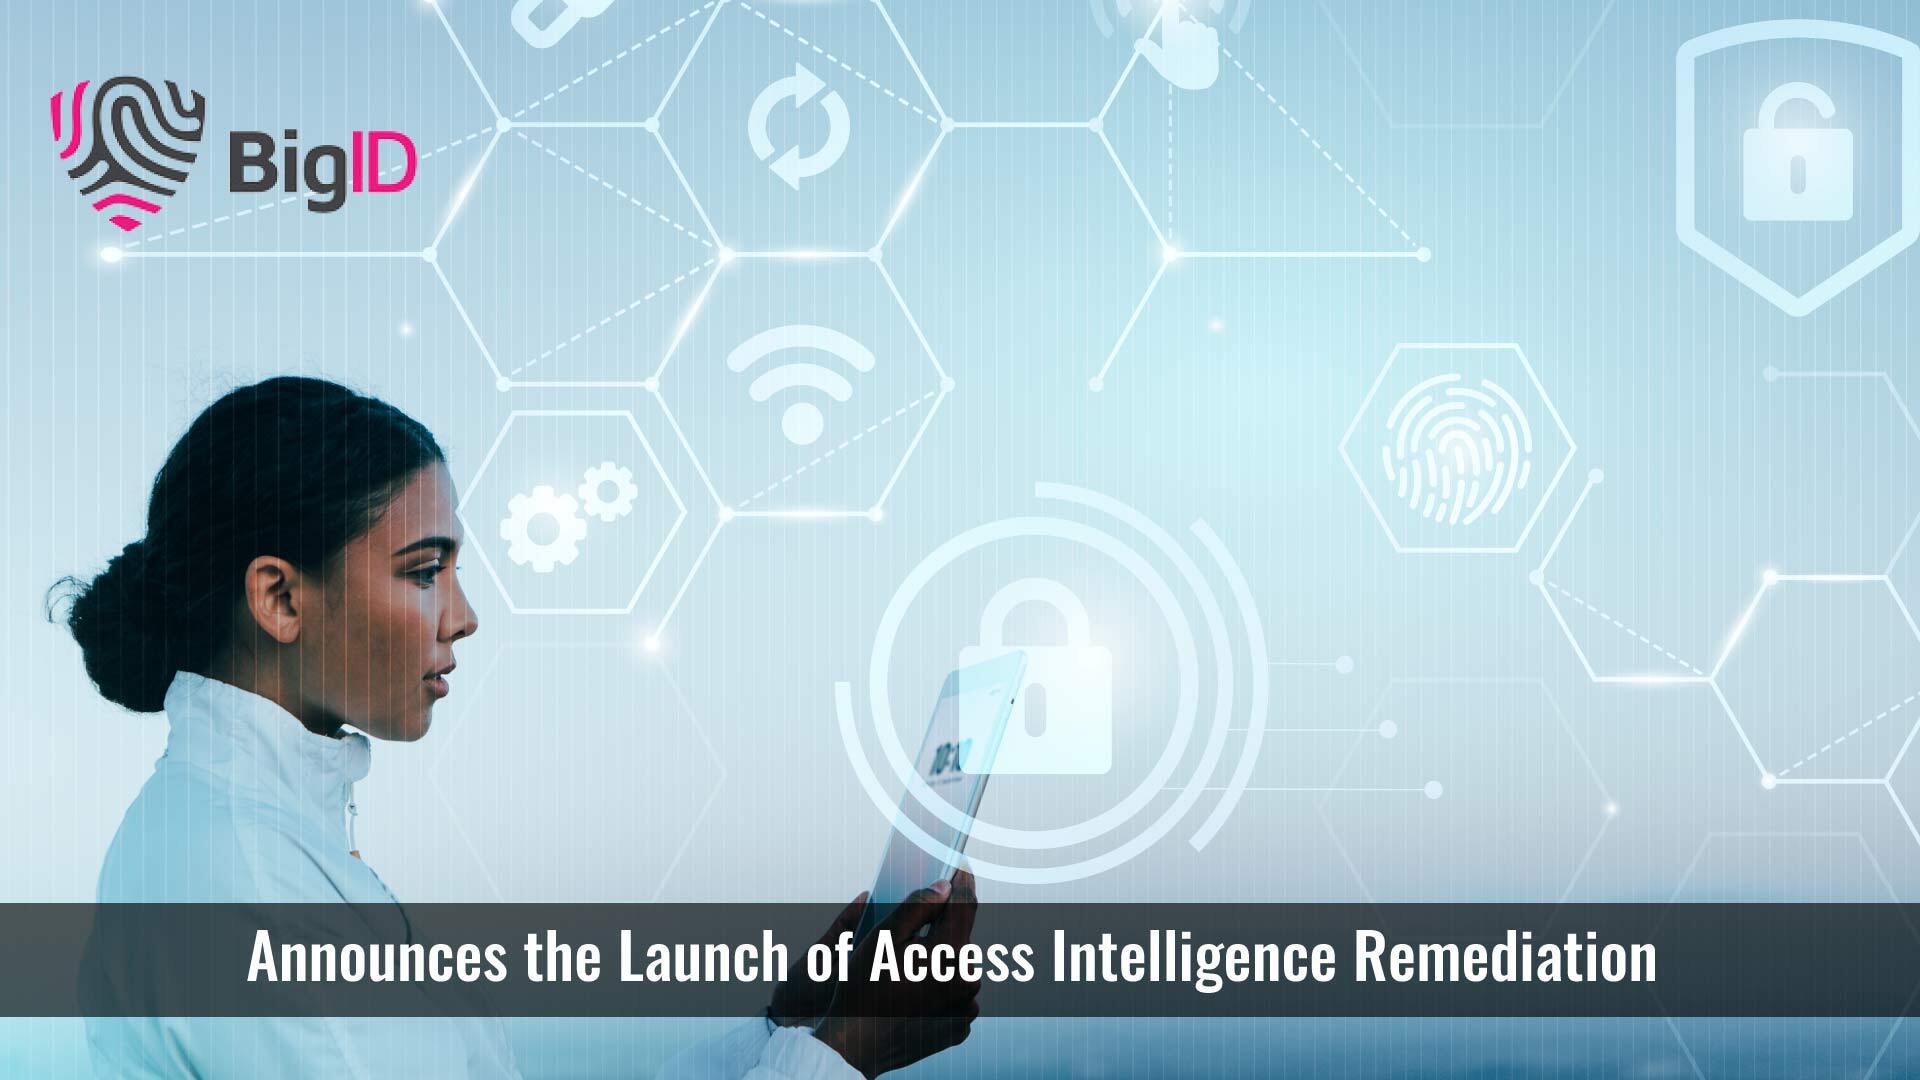 Automated Access Control for Data Security: BigID's New Access Intelligence Remediation